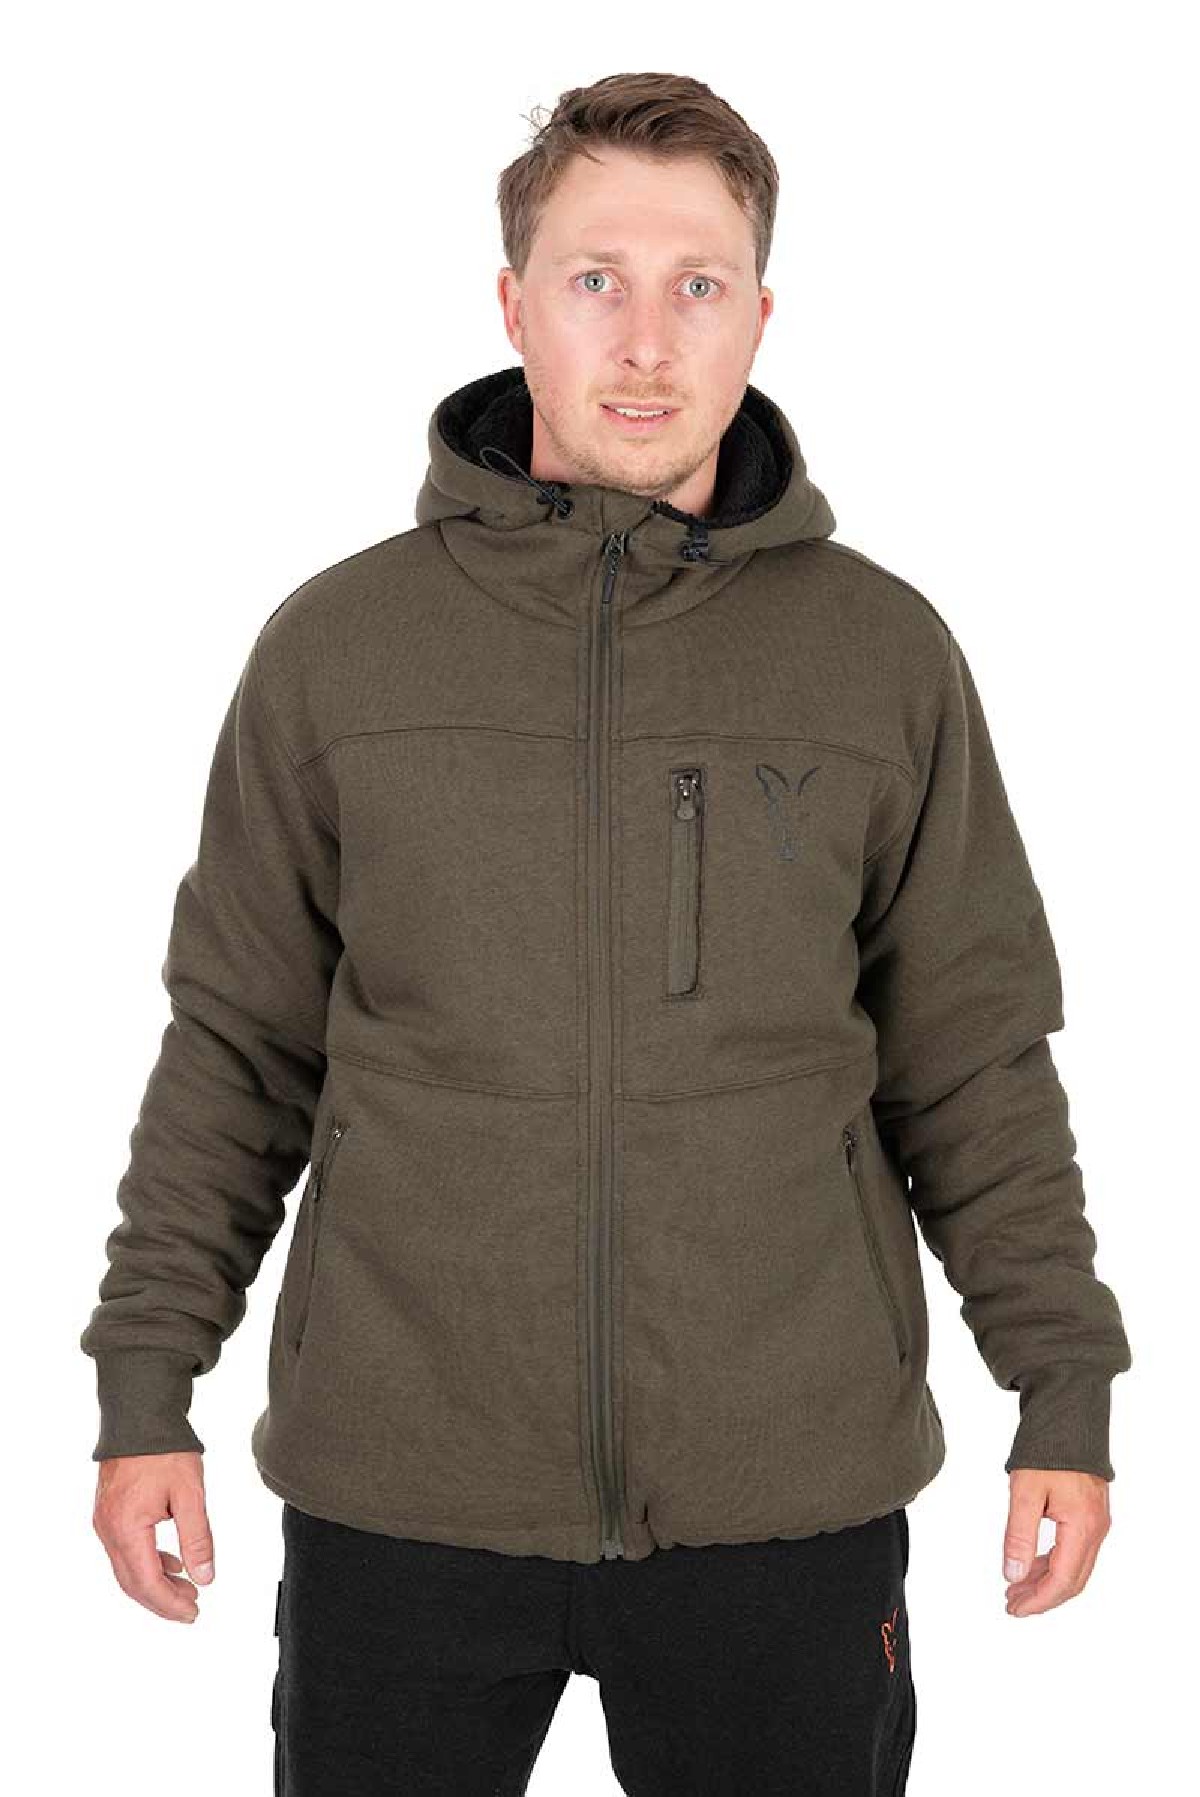 Fox Collection Sherpa Jacket Green & Black Large